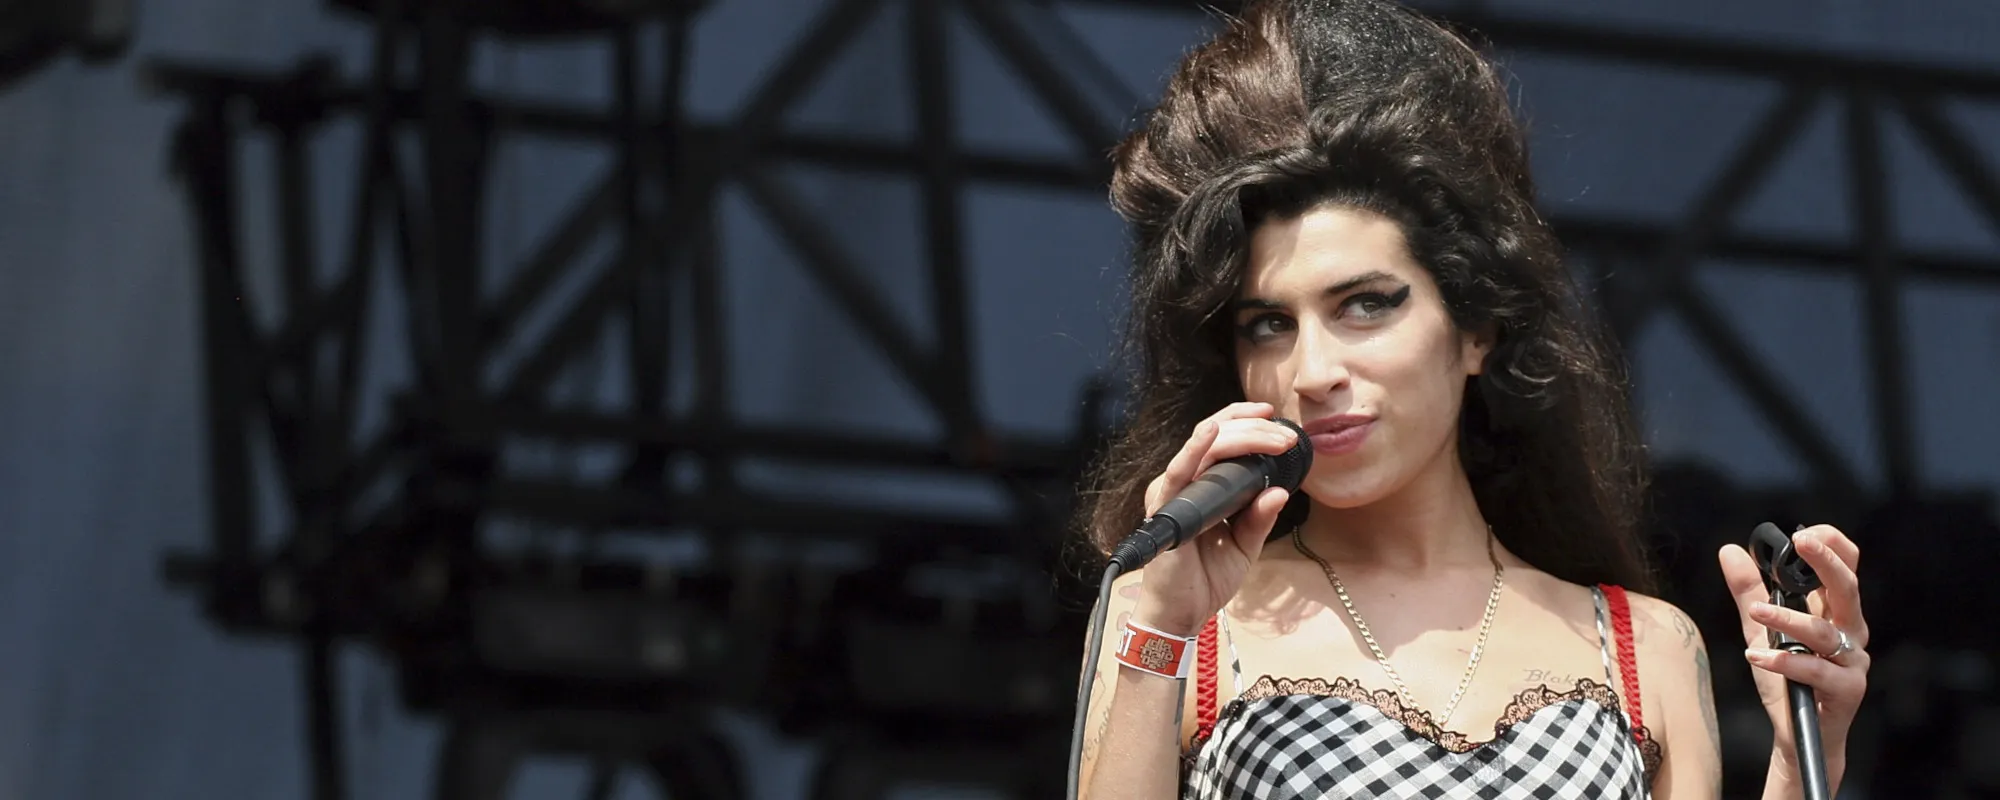 Amy Winehouse New Book to Feature Personal Journals and Handwritten Lyrics